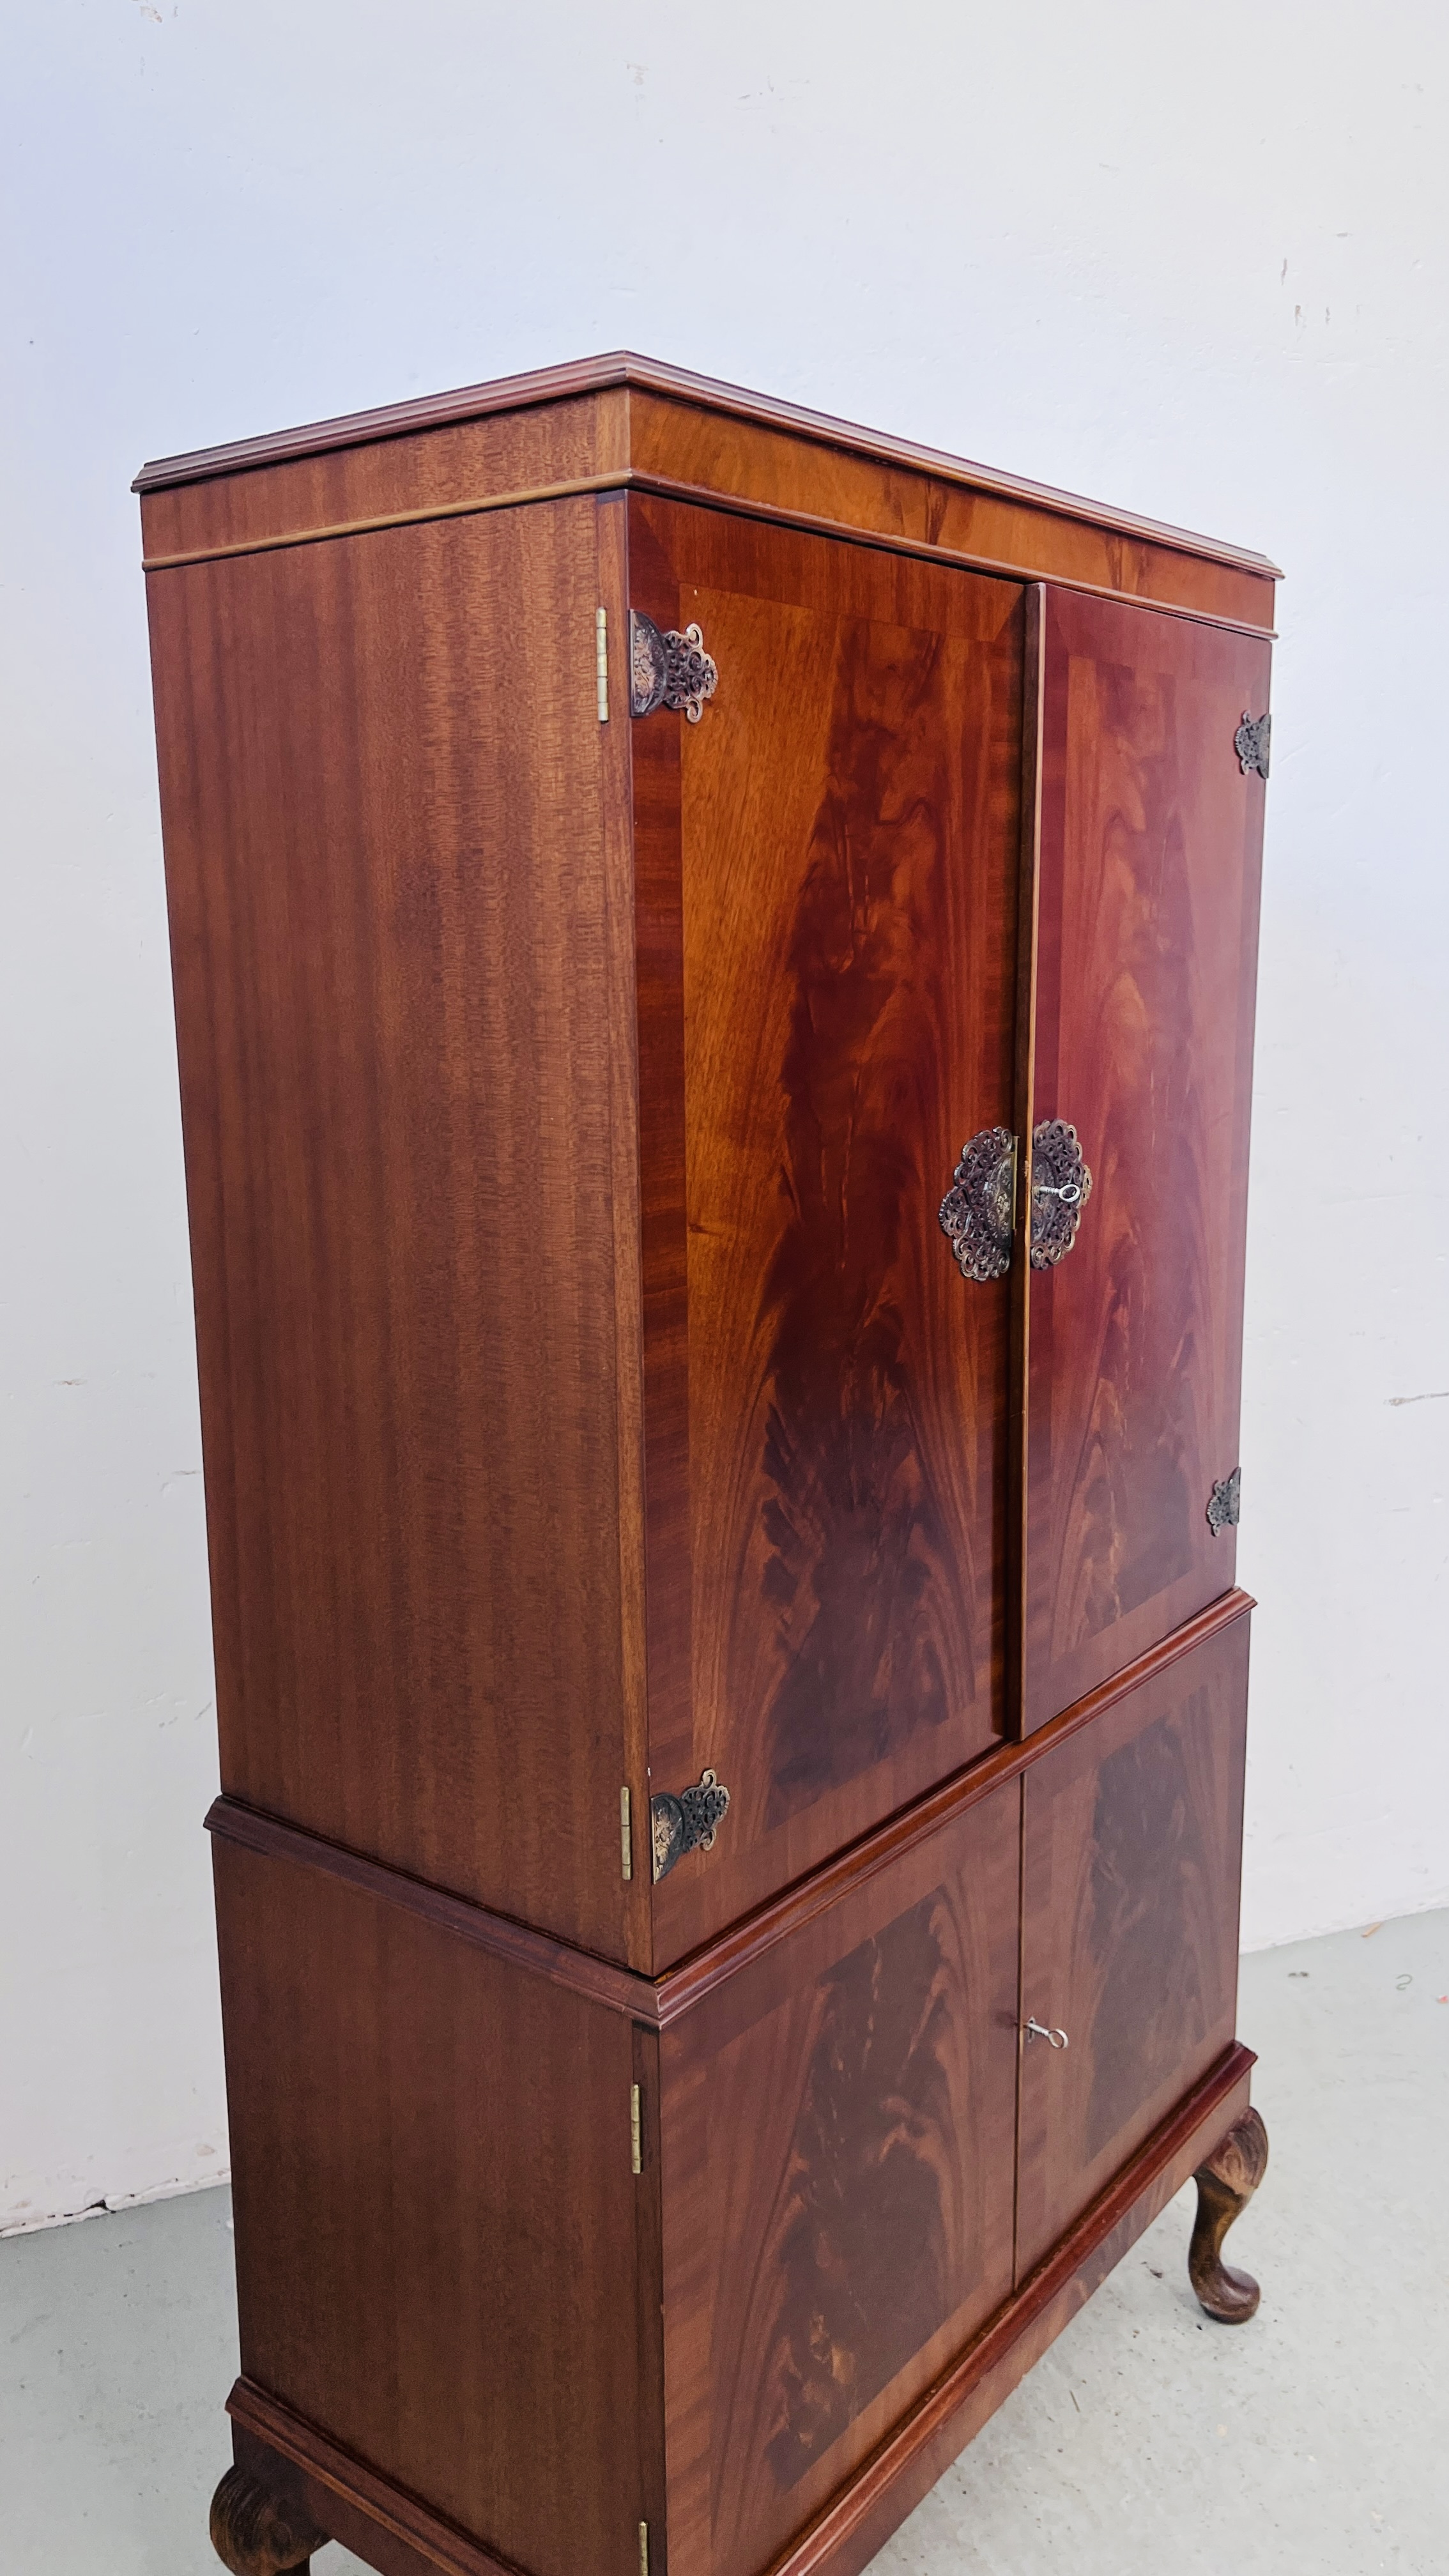 A GOOD QUALITY REPRODUCTION MAHOGANY FINISH DRINKS CABINET WITH MIRRORED INTERIOR STANDING ON - Image 6 of 12